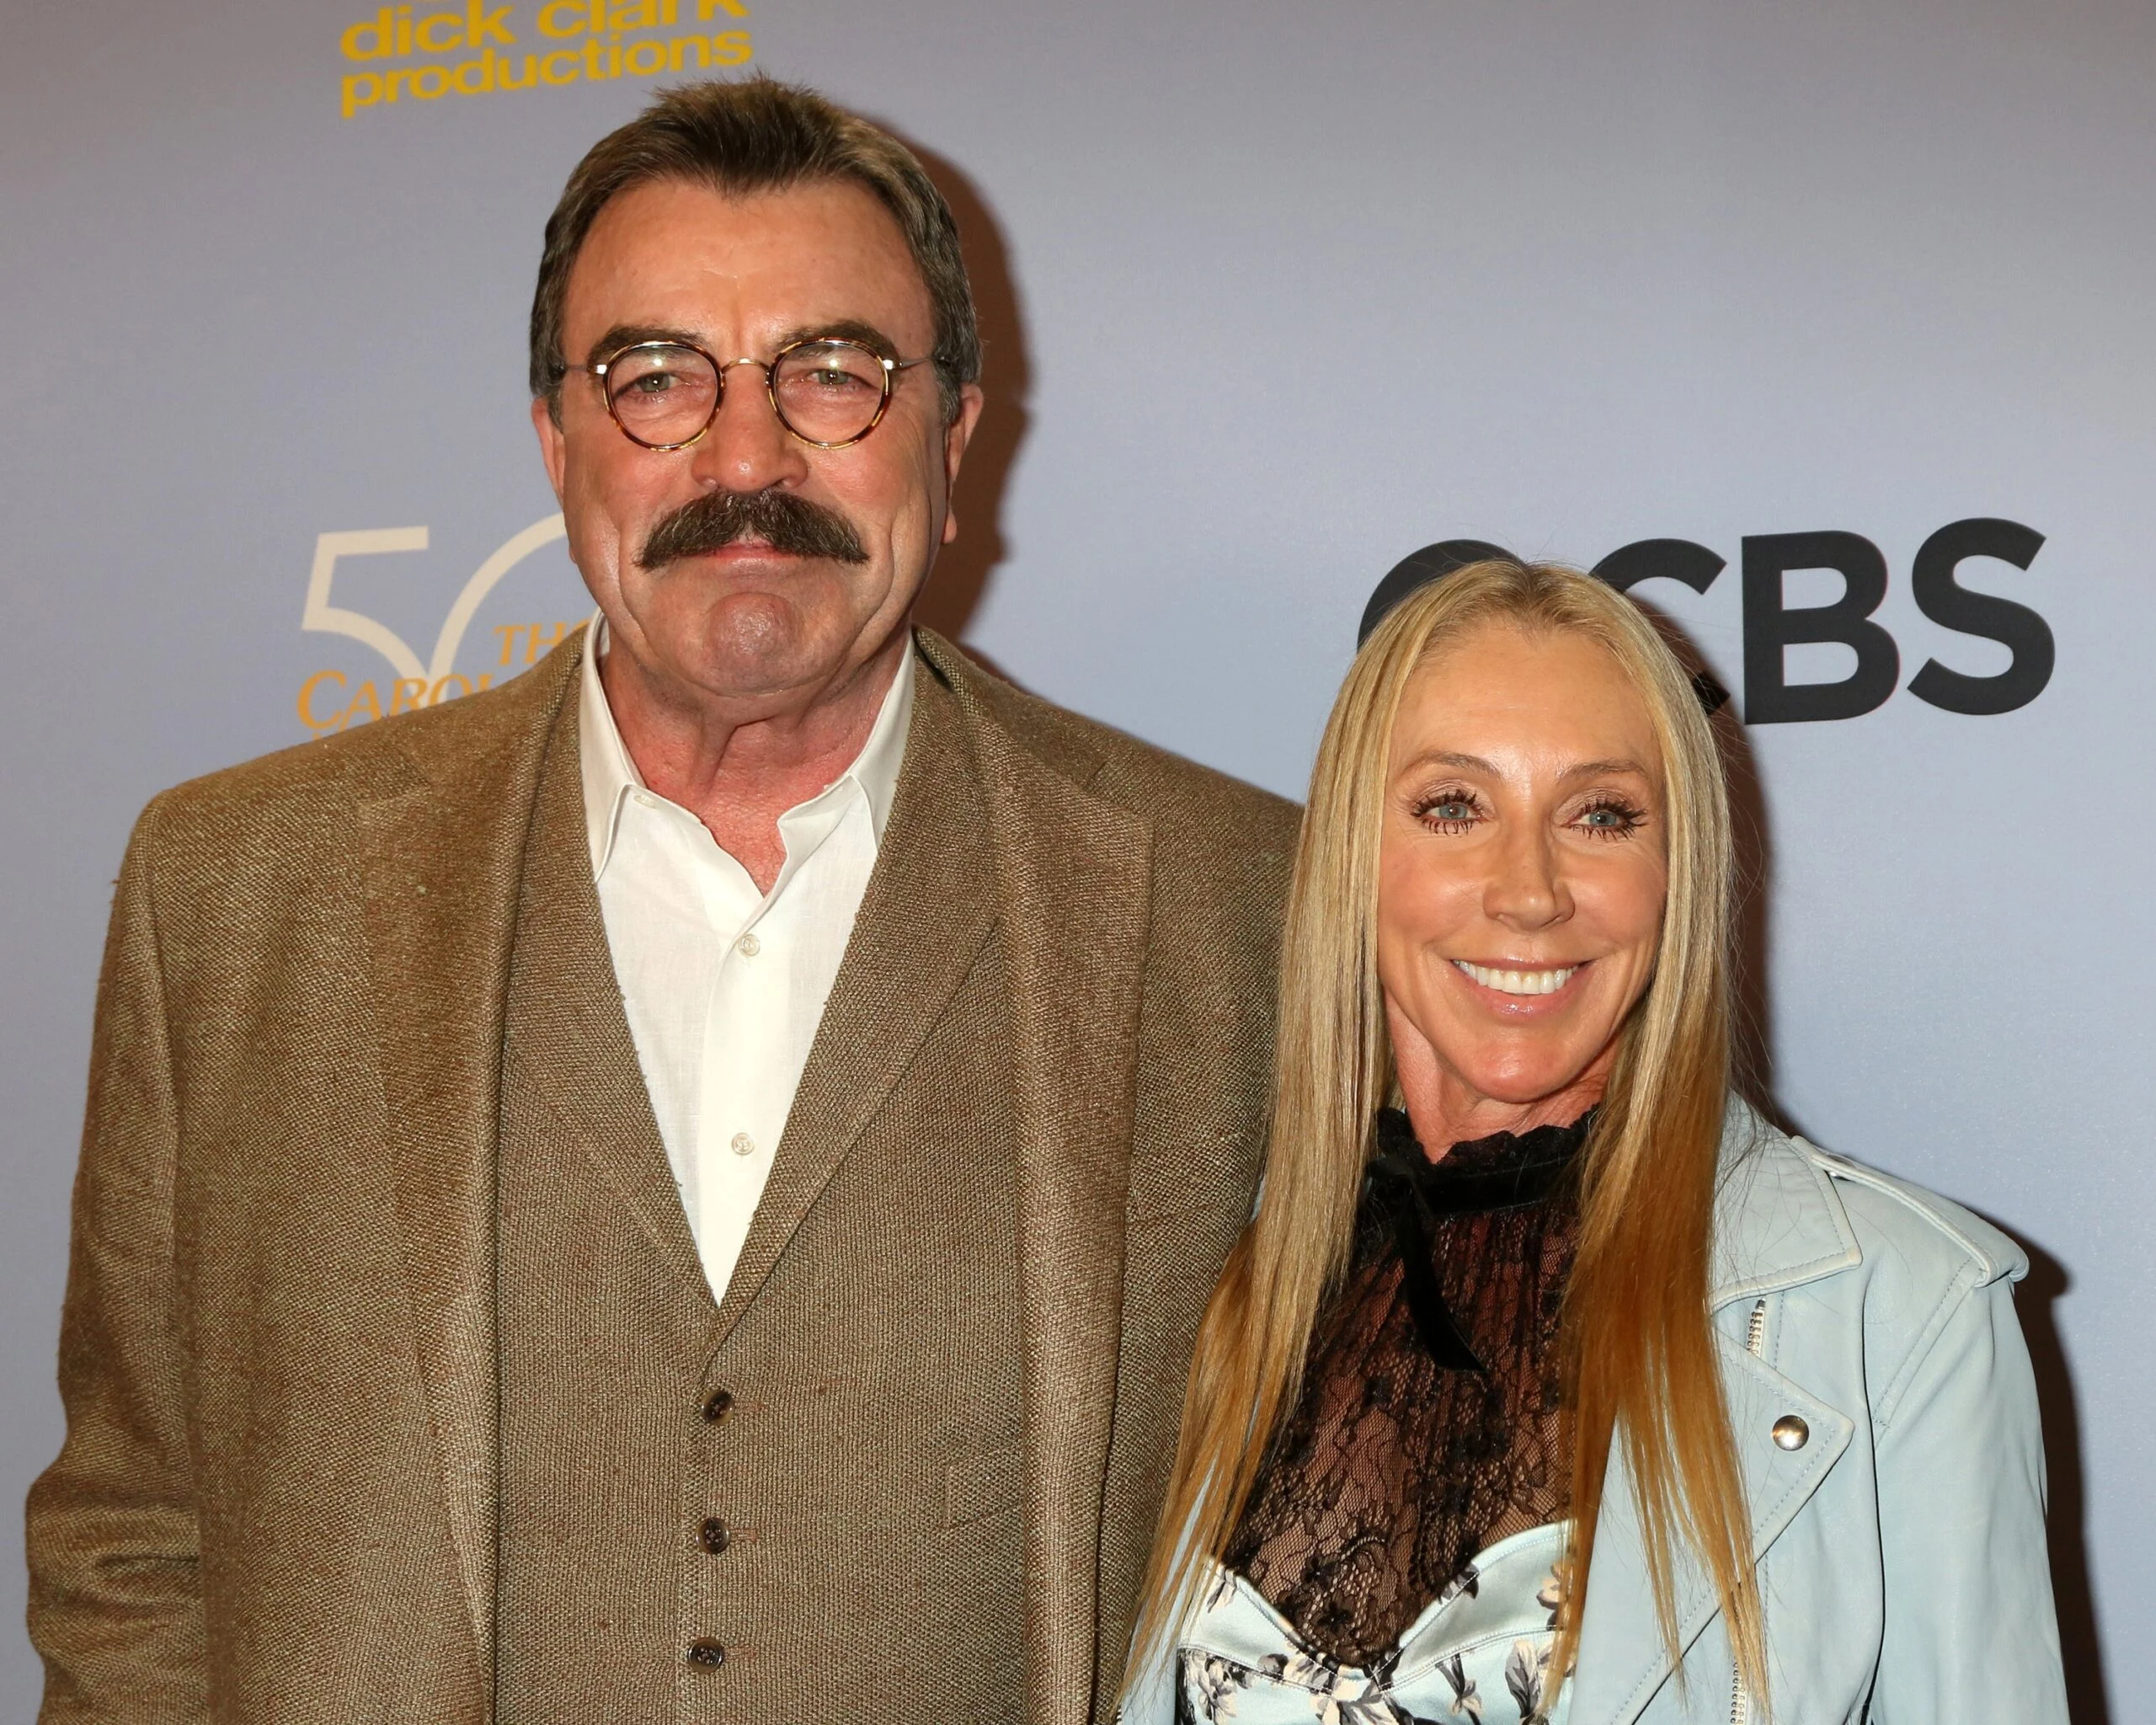 Image of Tom Selleck and his wife Jillie Mack, they are both American Actors